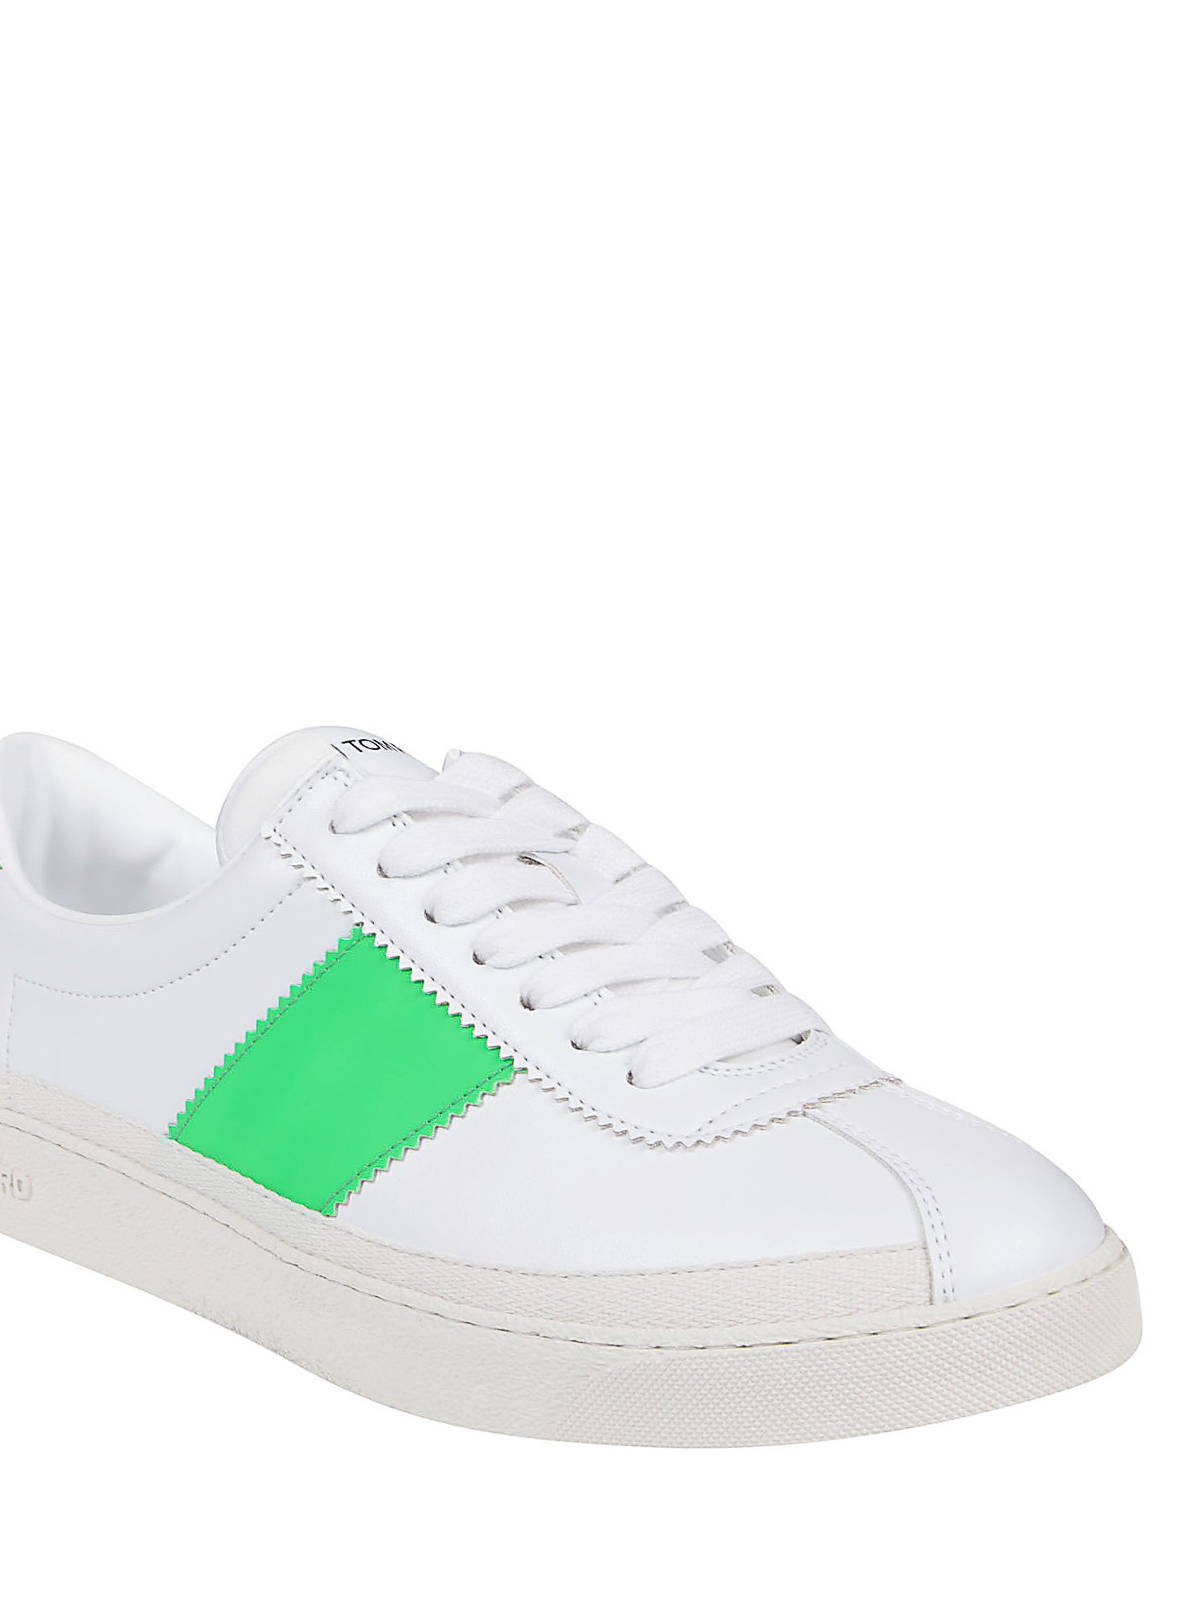 Trainers Tom Ford - Bannister sneakers - J1261TTAP001C1401 